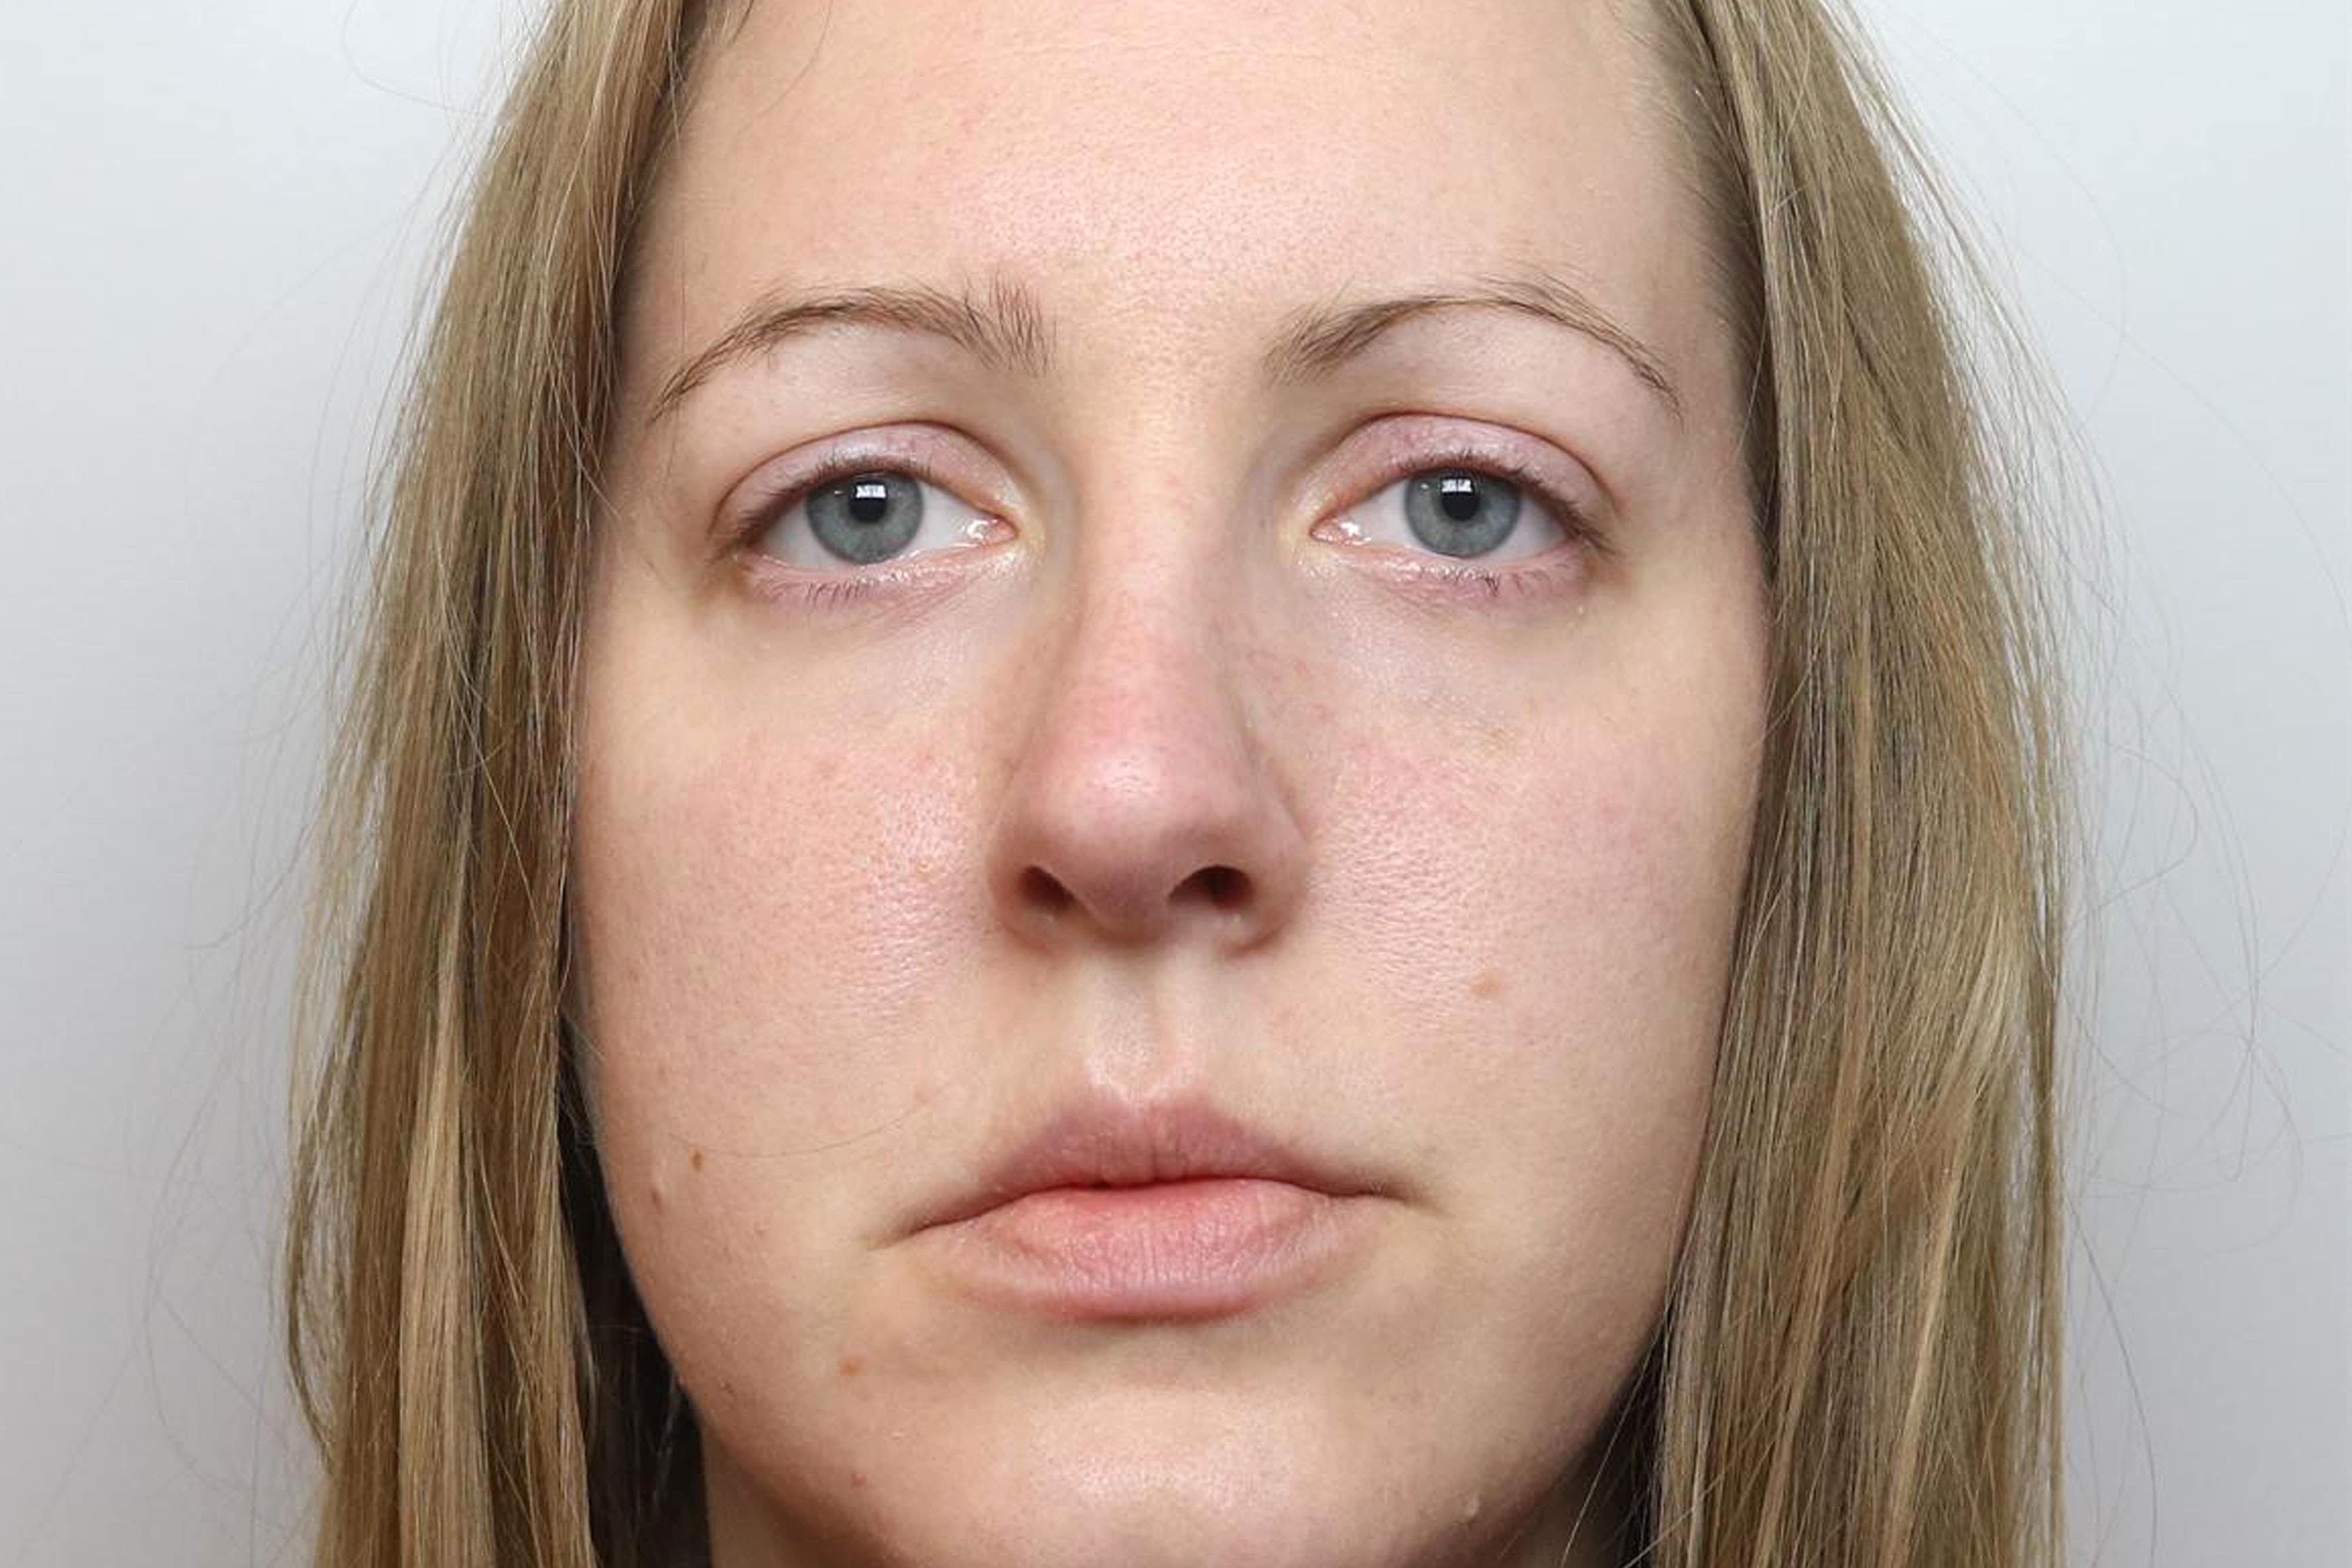 The families of Lucy Letby’s victims branded the nurse ‘evil’ as they gave emotional victim impact statements during her sentencing hearing at Manchester Crown Court